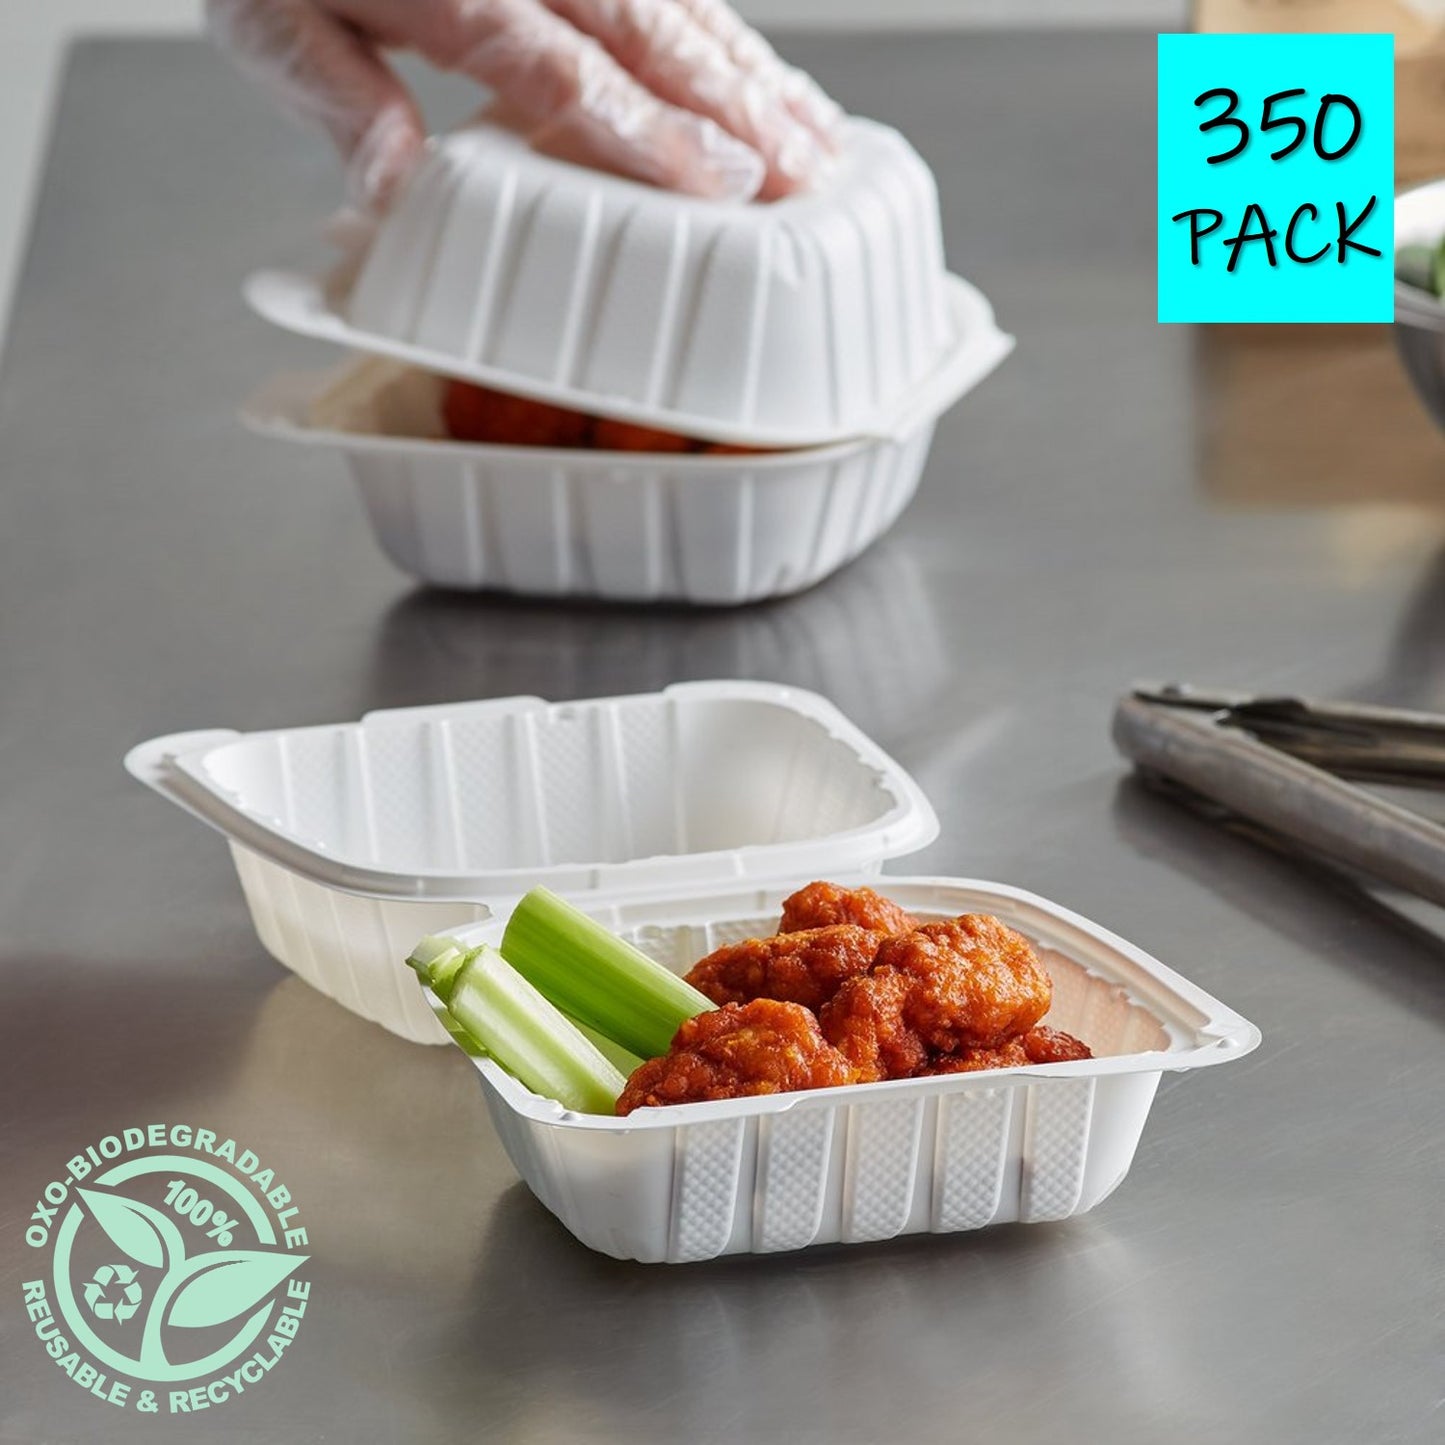 Take Out Clamshell 6" 1 Compartment 6X6X3 Microwaveable Eco-Friendly 350 Pack